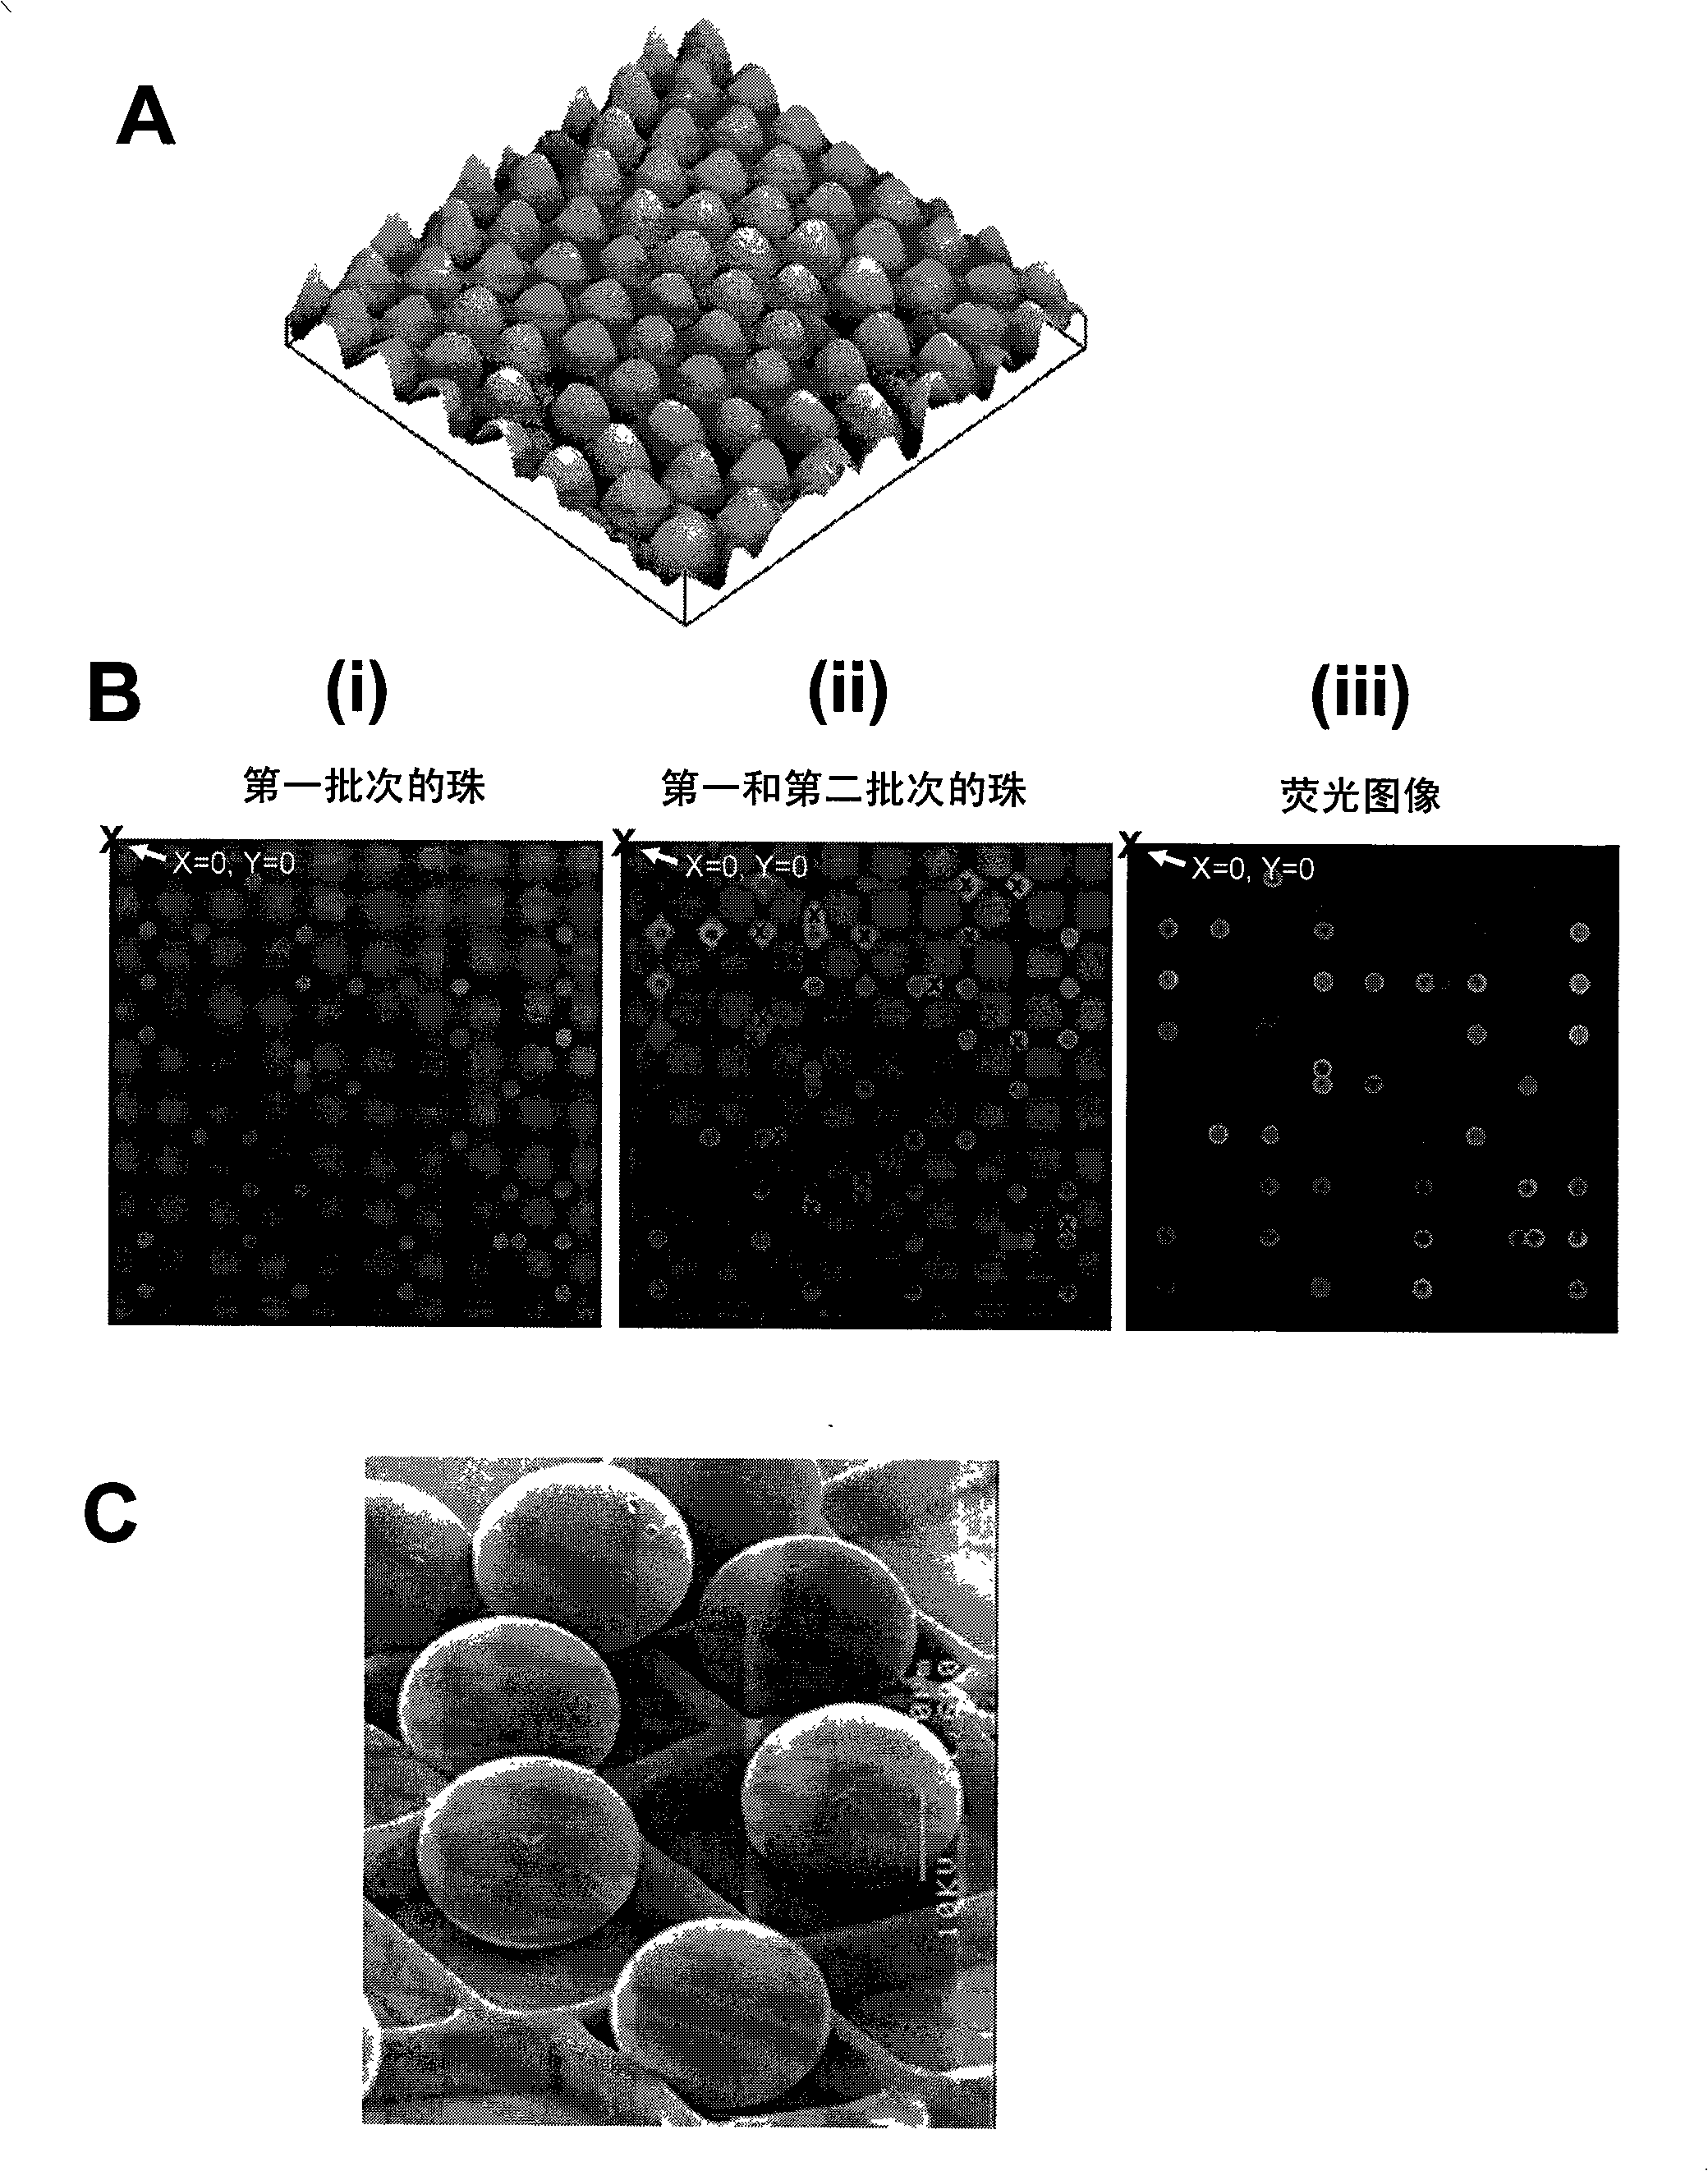 A microarray system and a process for producing microarrays